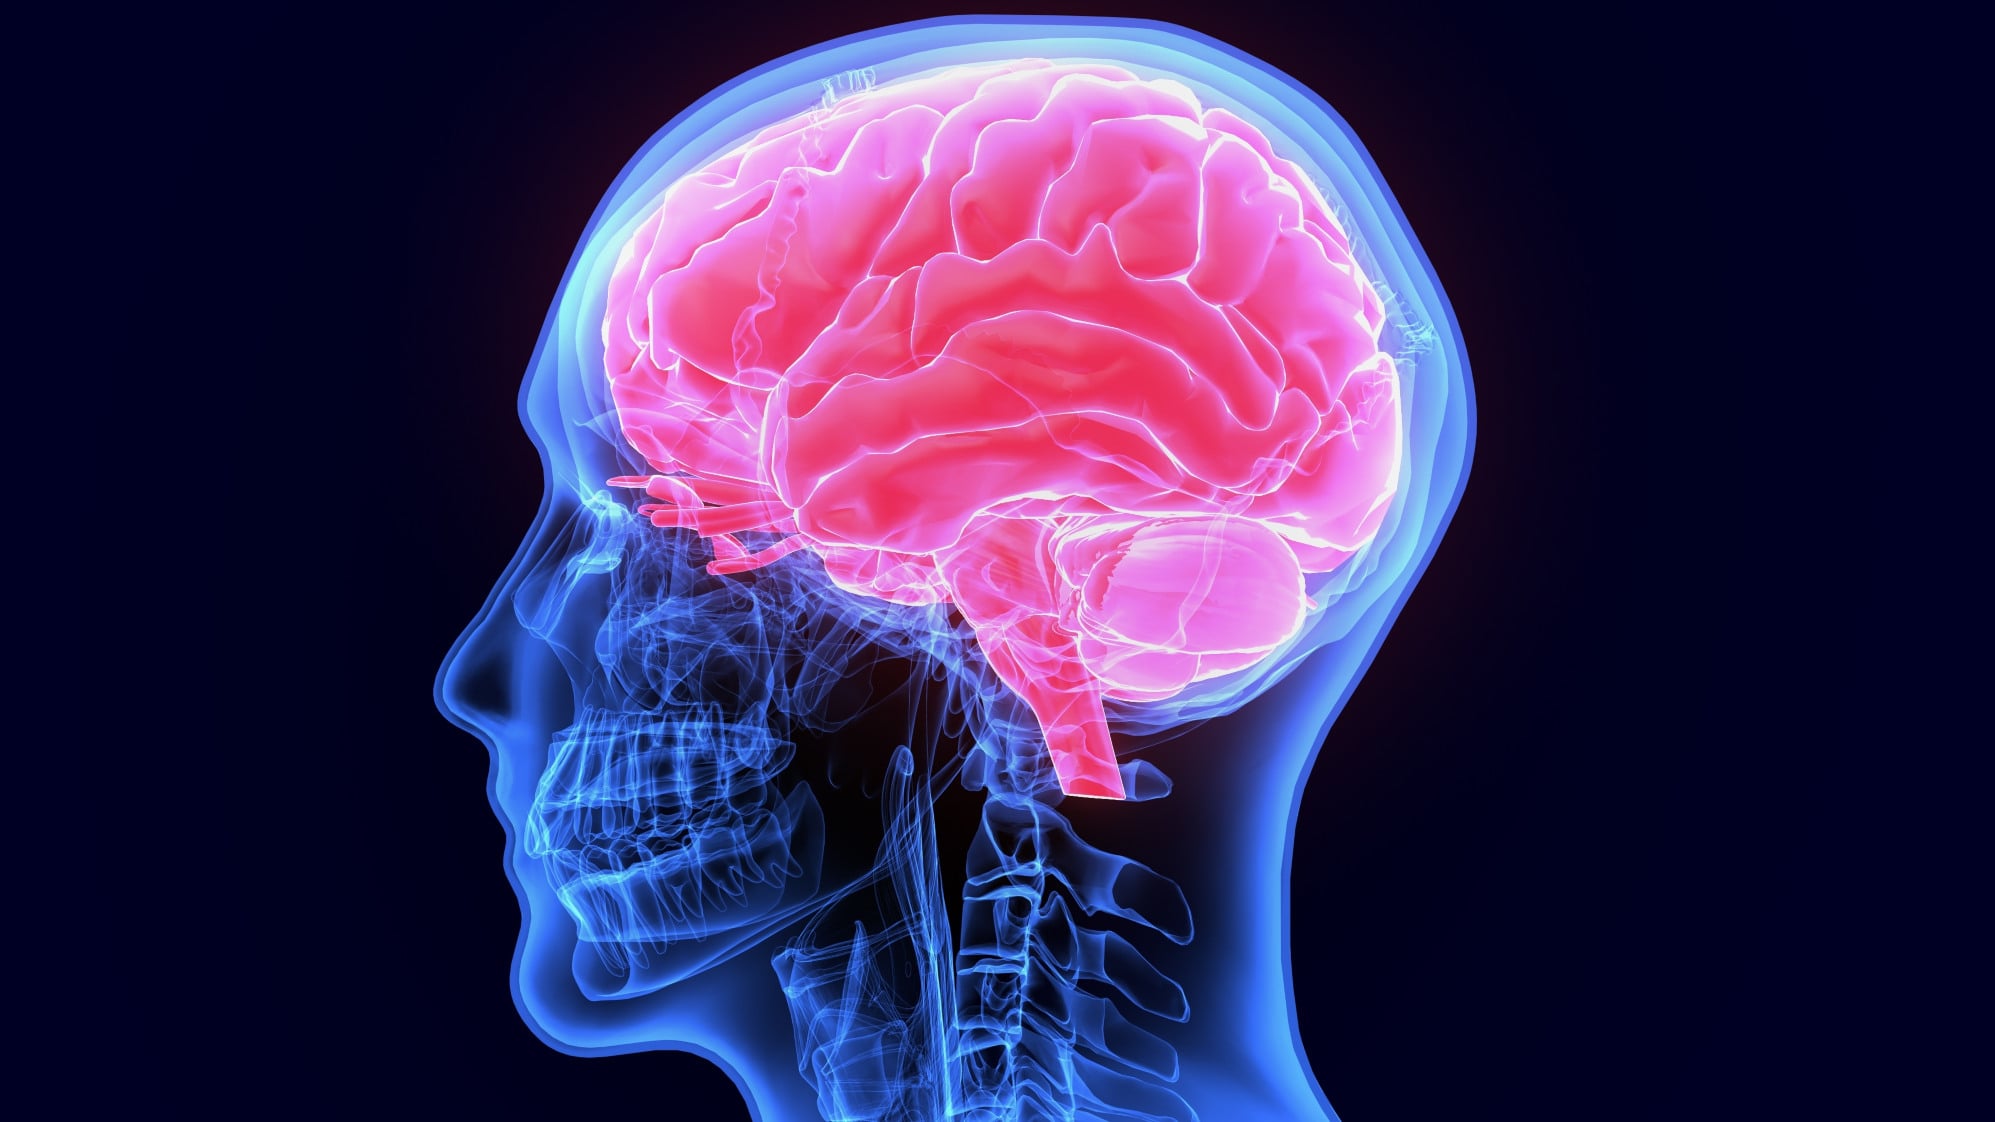 Can You Tell If Someone Has a Brain Injury?